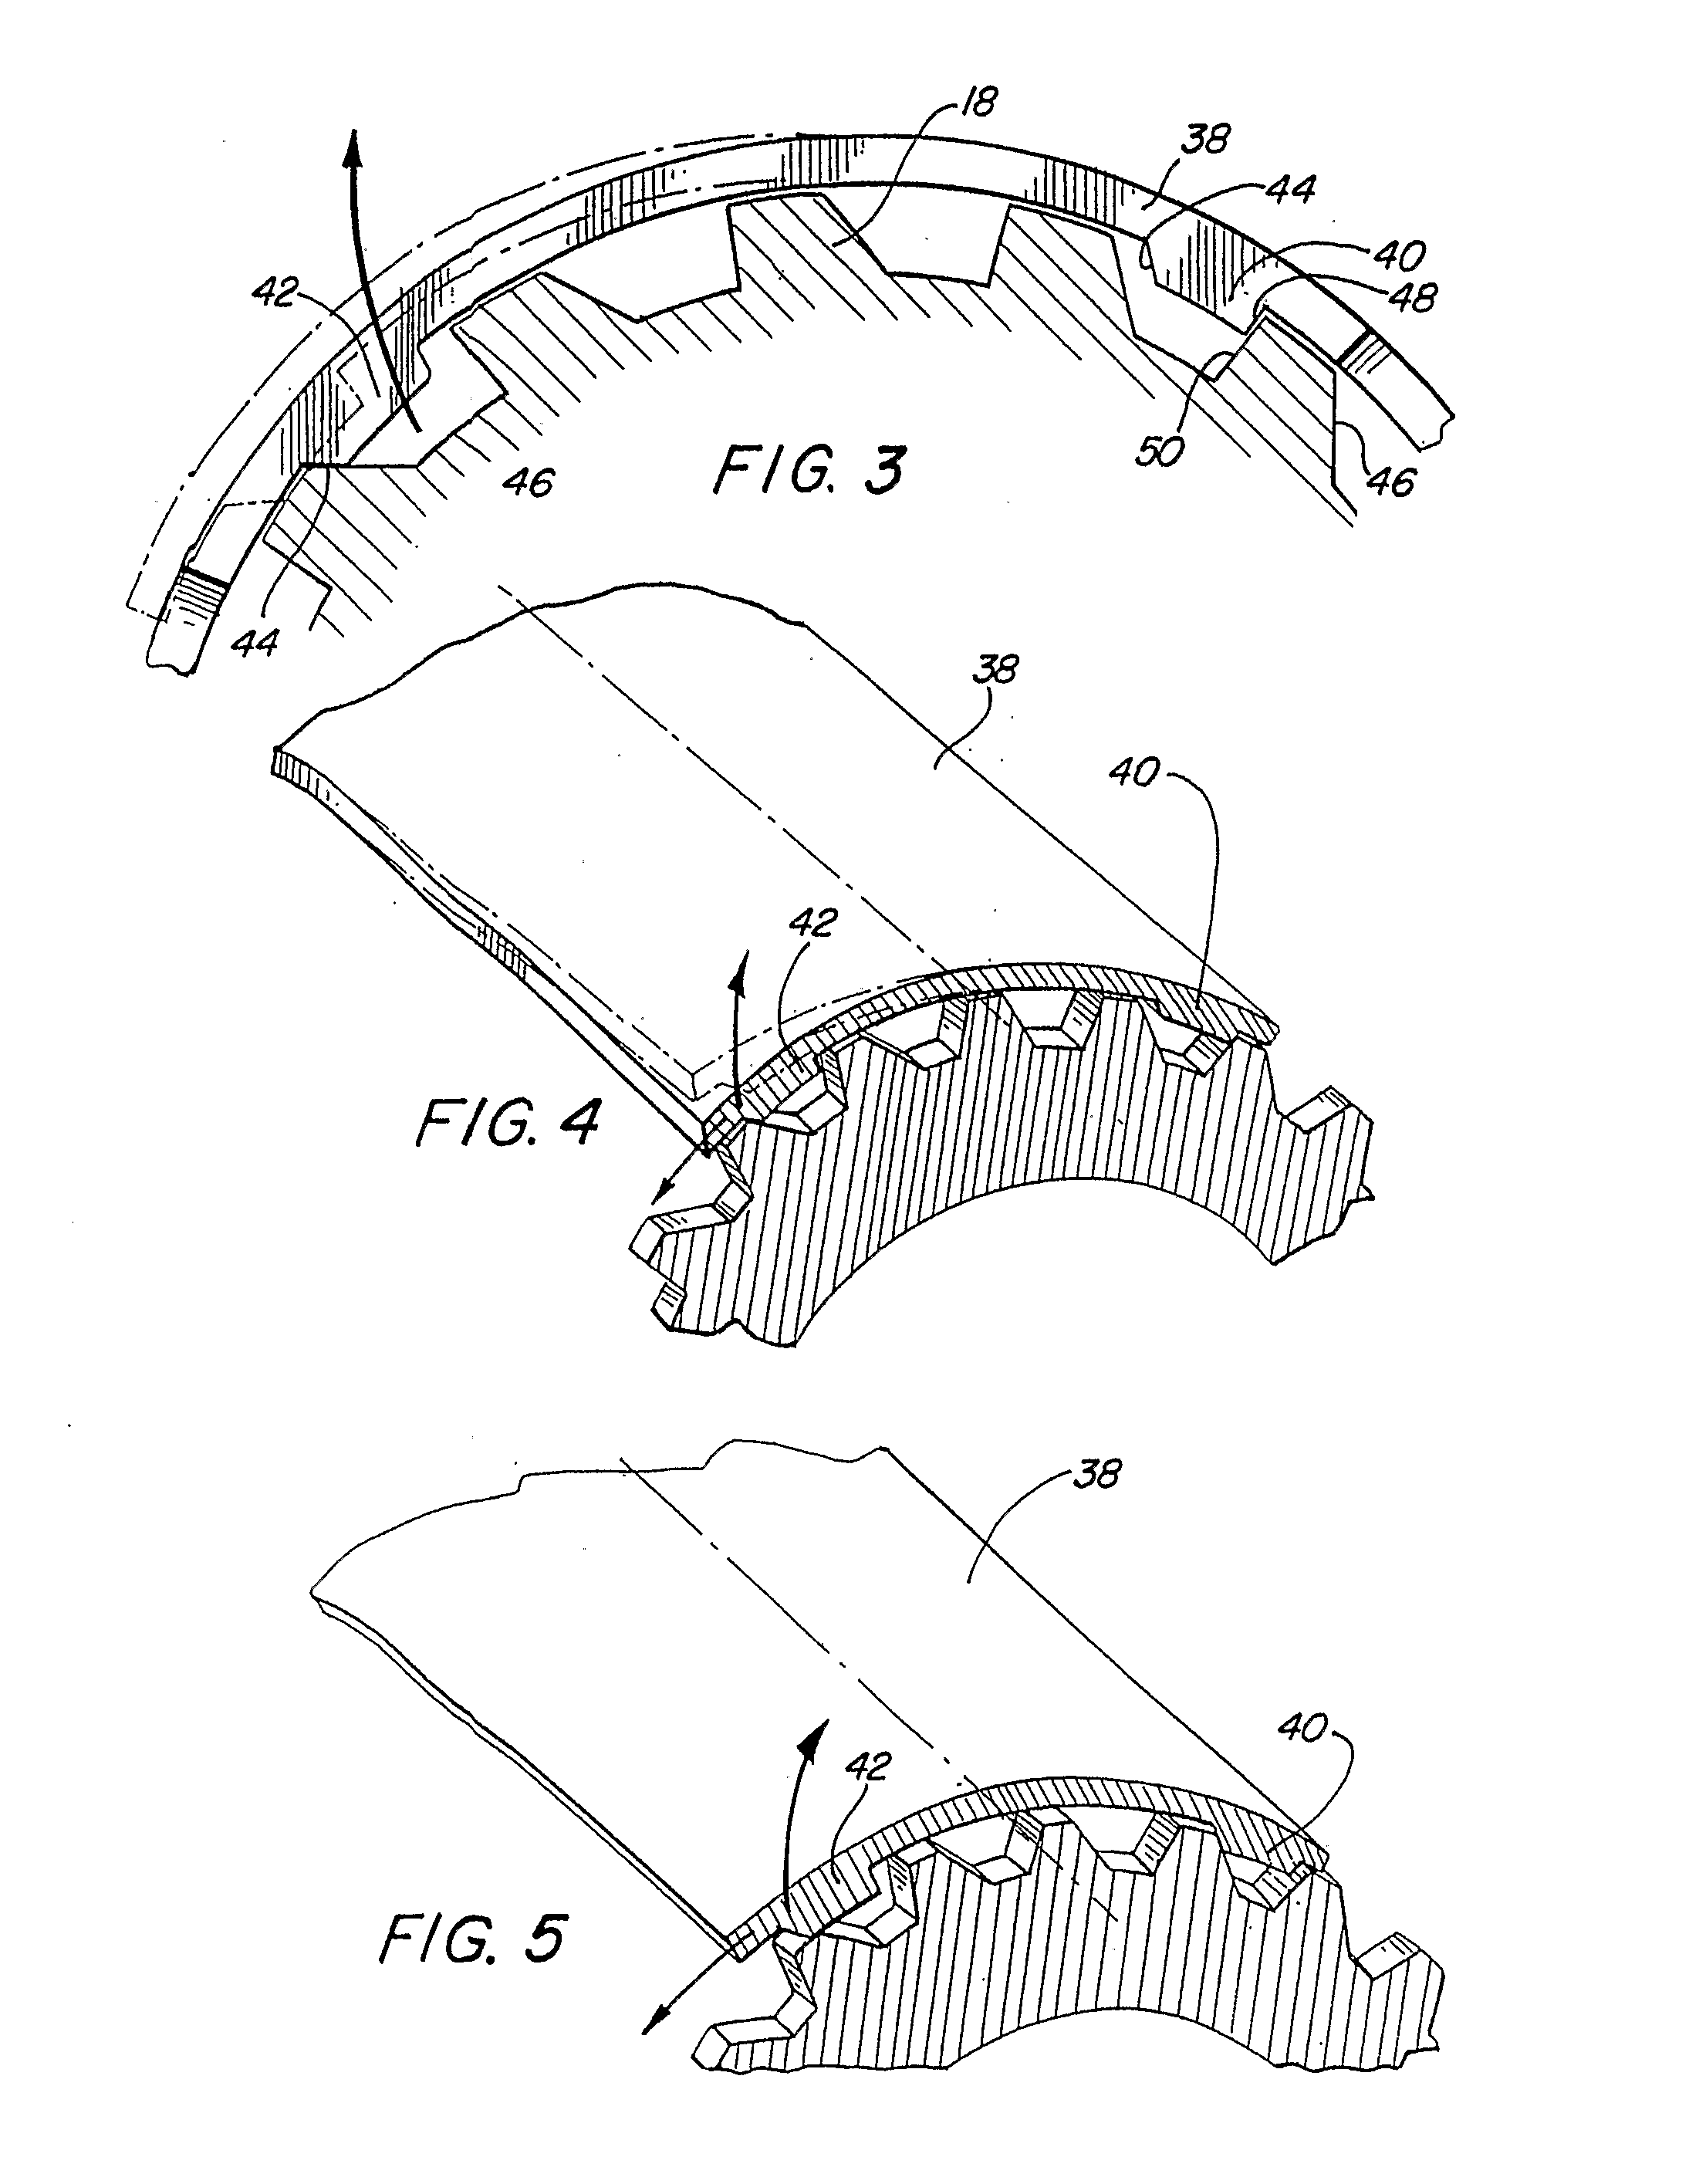 Fluid Coupling Assembly with Integral Retention Mechanism